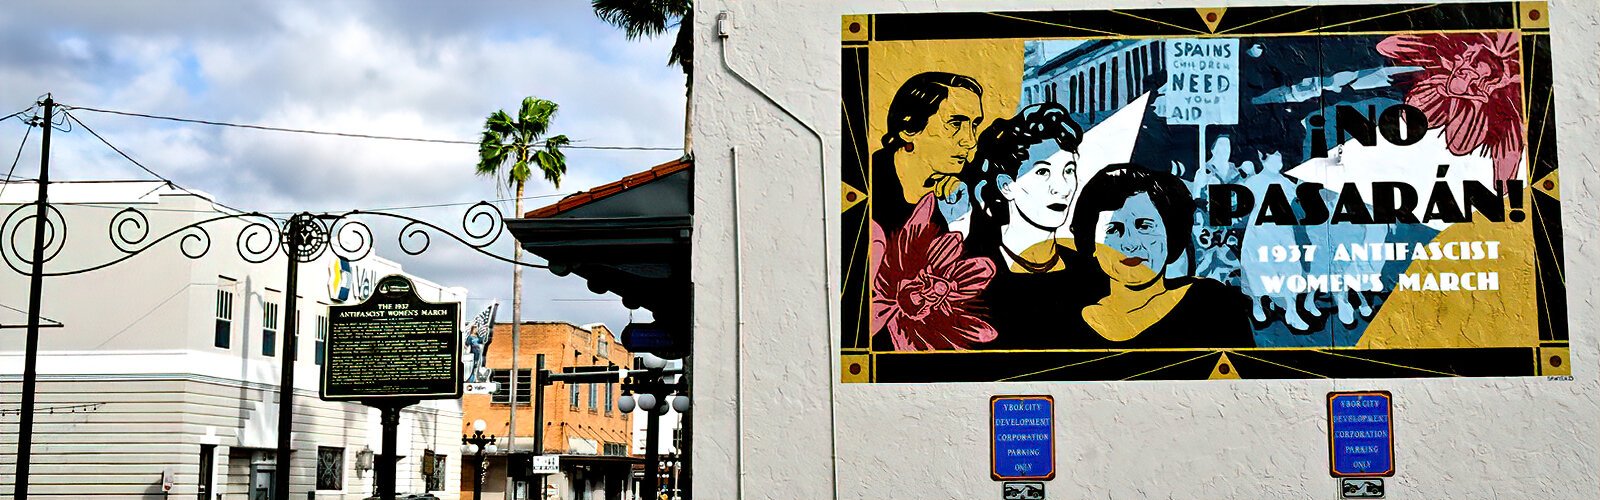 A historical marker and mural honor the 1937 Antifascist Women’s March when thousands led by women marched down Seventh Avenue to protest the rise of fascism in Spain.